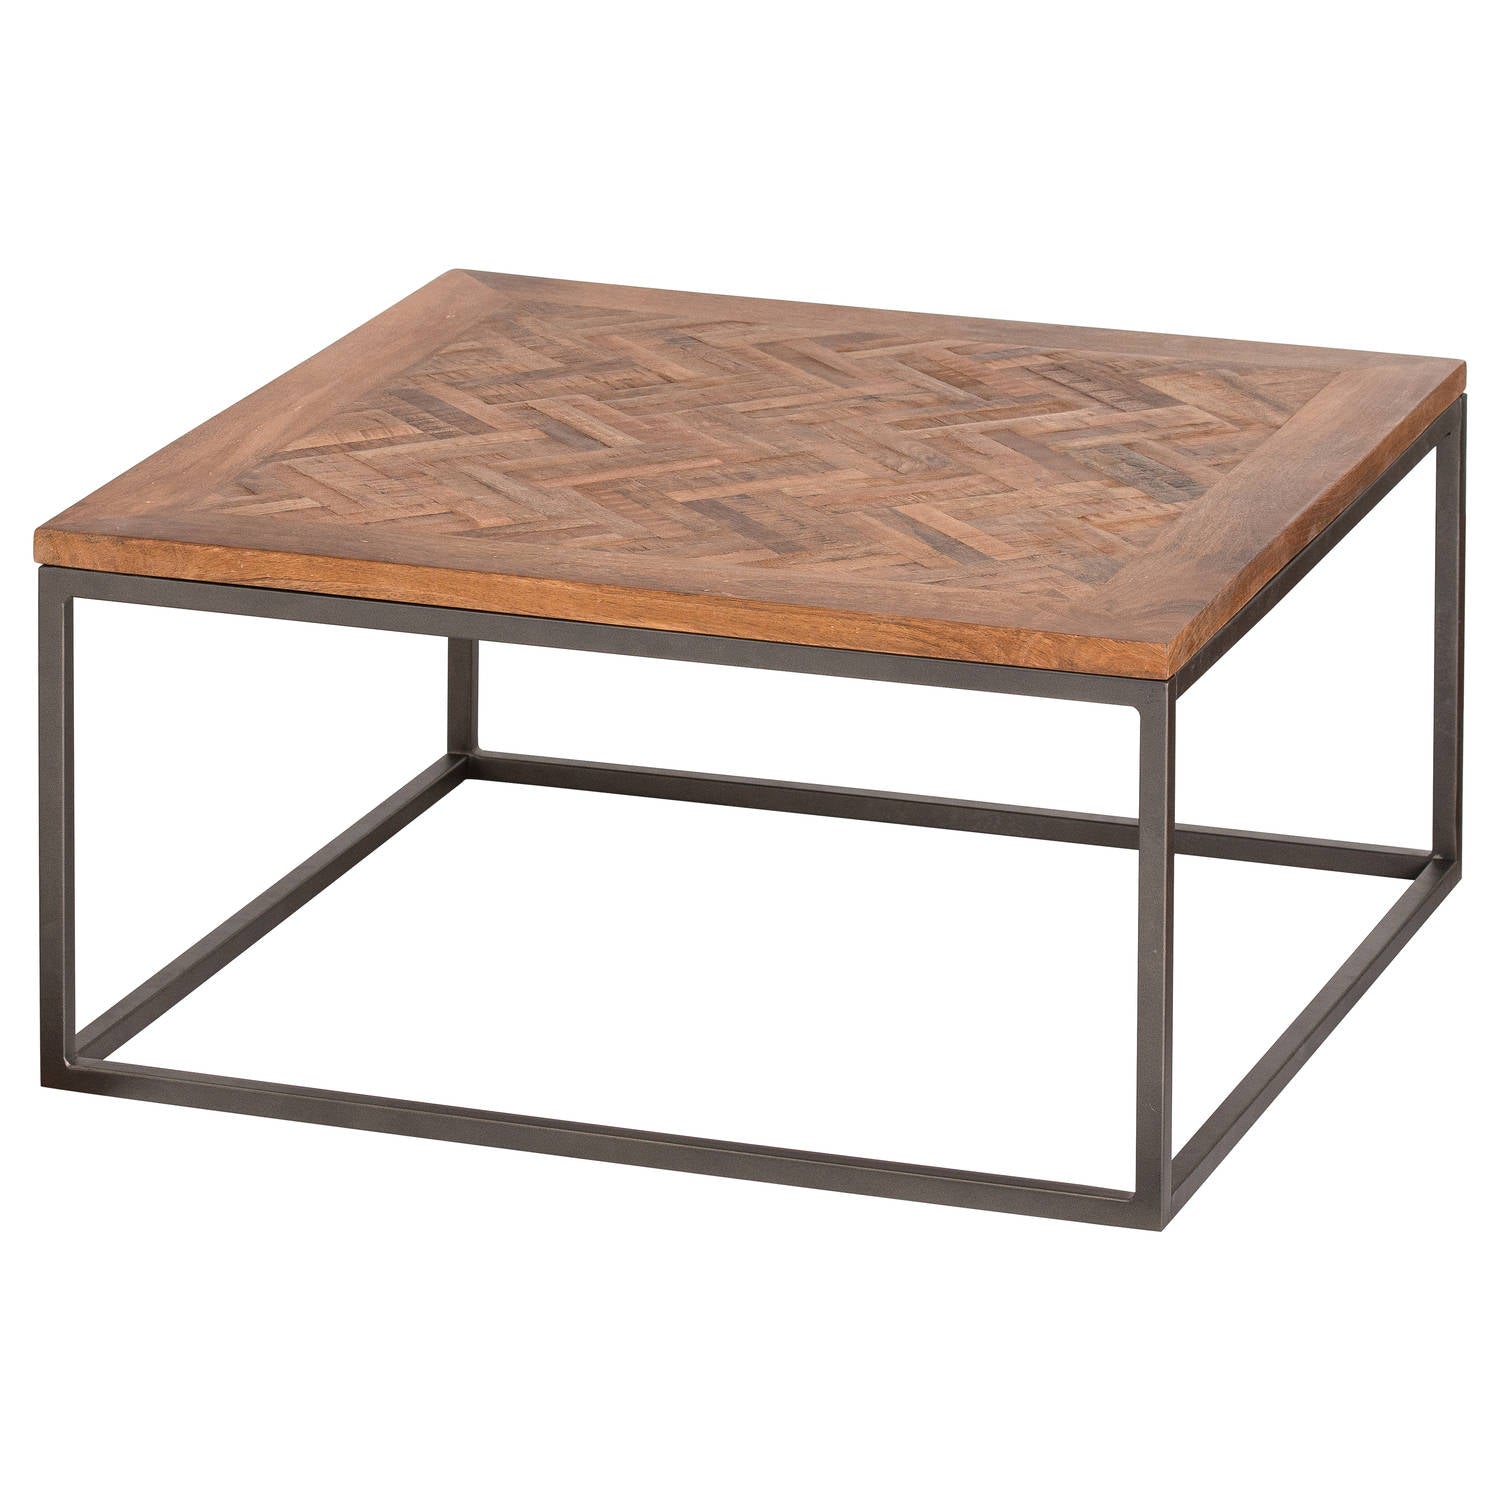 Hoxton Coffee Table With Parquet Top